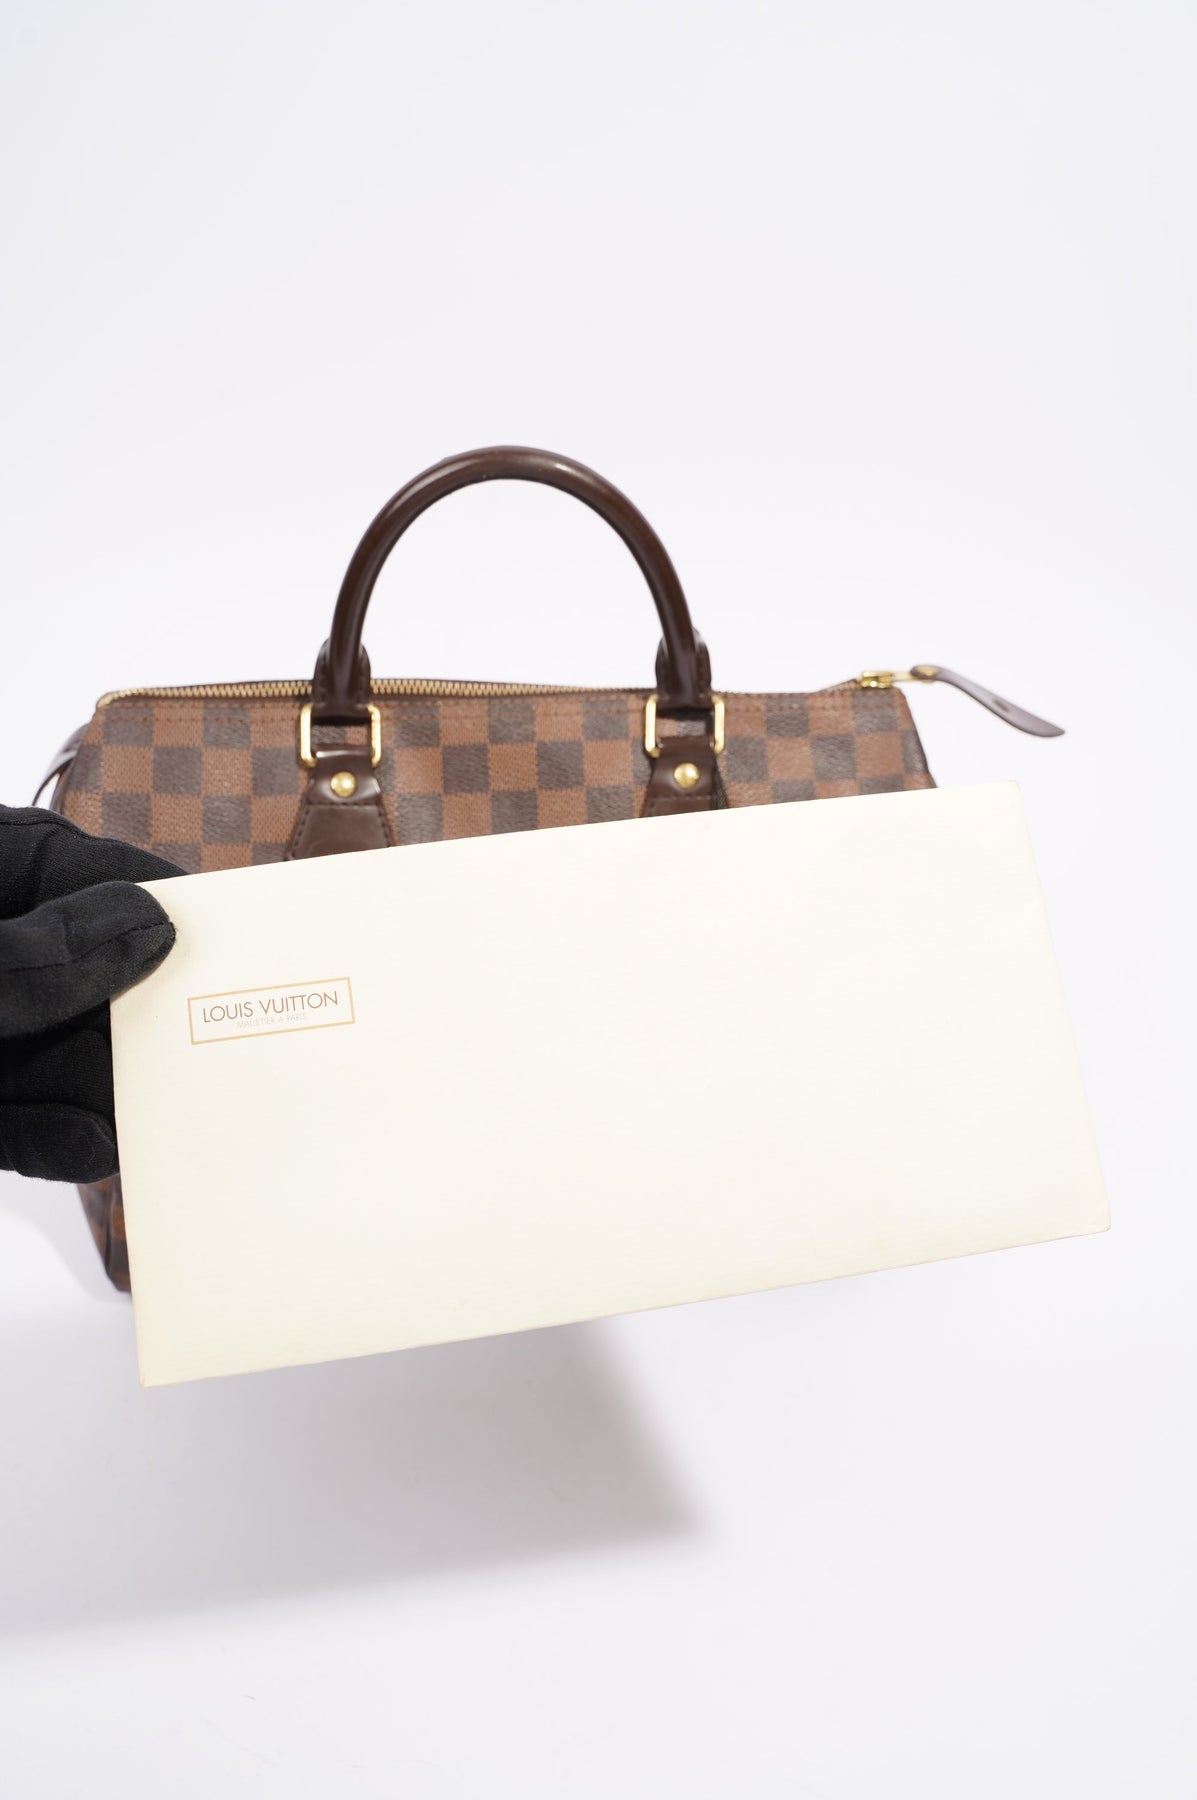 LOUIS VUITTON DAMIER EBENE SPEEDY 30 BOSTON BAG MM for sale at auction on  29th October